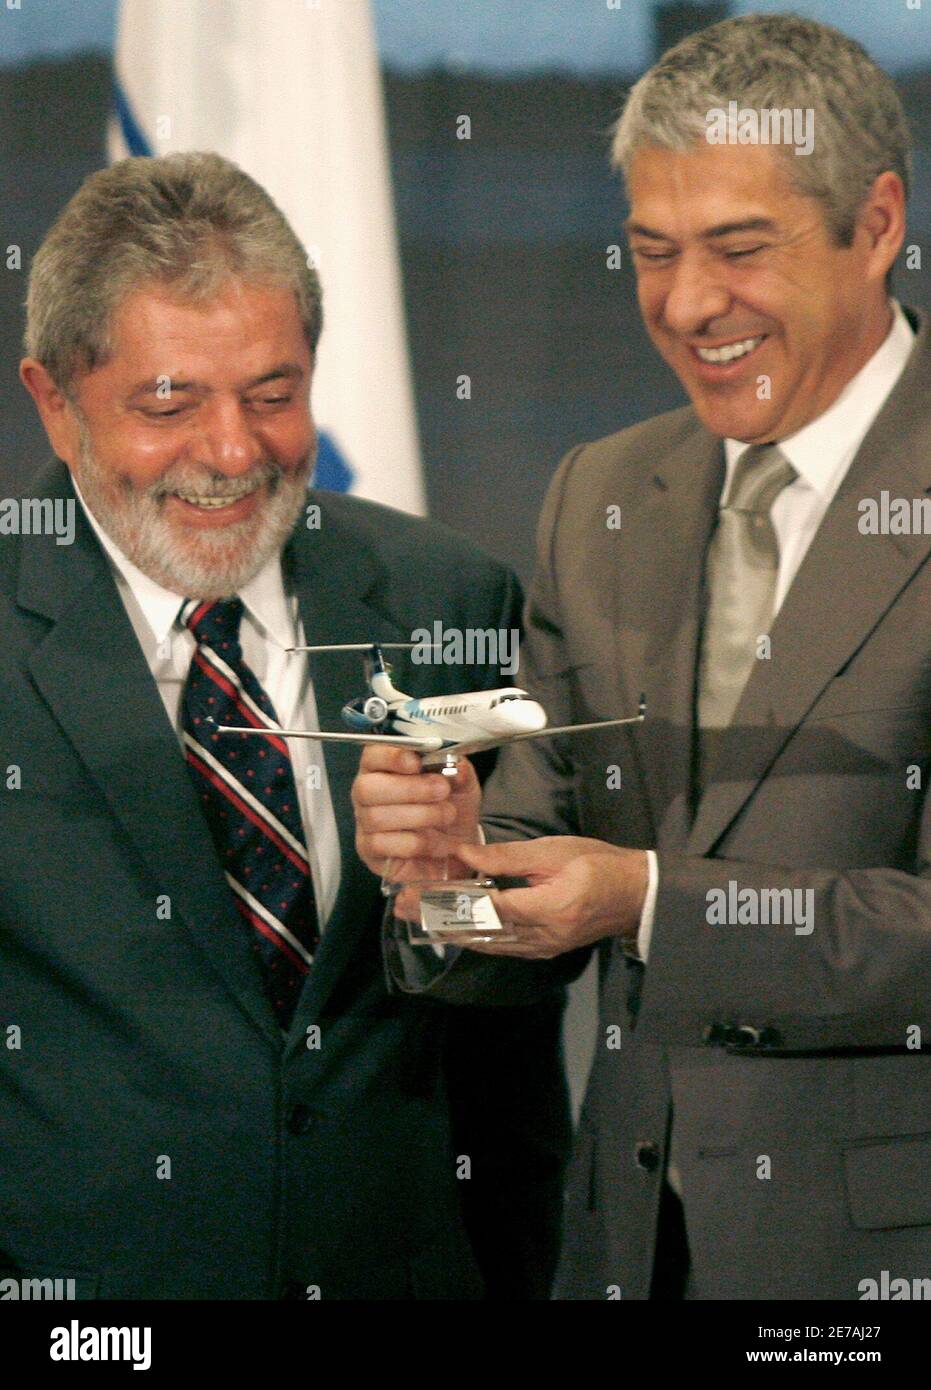 Brazil's President Luiz Inacio Lula da Silva (L) and Portugal's Prime Minister Jose Socrates pose with a model of aircraft after a cooperation agreement in Lisbon July 26, 2008.  Brazil's Embraer, the world's third-biggest commercial jet maker, said on Saturday it would invest 148 million euros in two components plants in Portugal to expand its operation in Europe, now mainly focused on aircraft servicing. REUTERS/Nacho Doce (PORTUGAL) Stock Photo